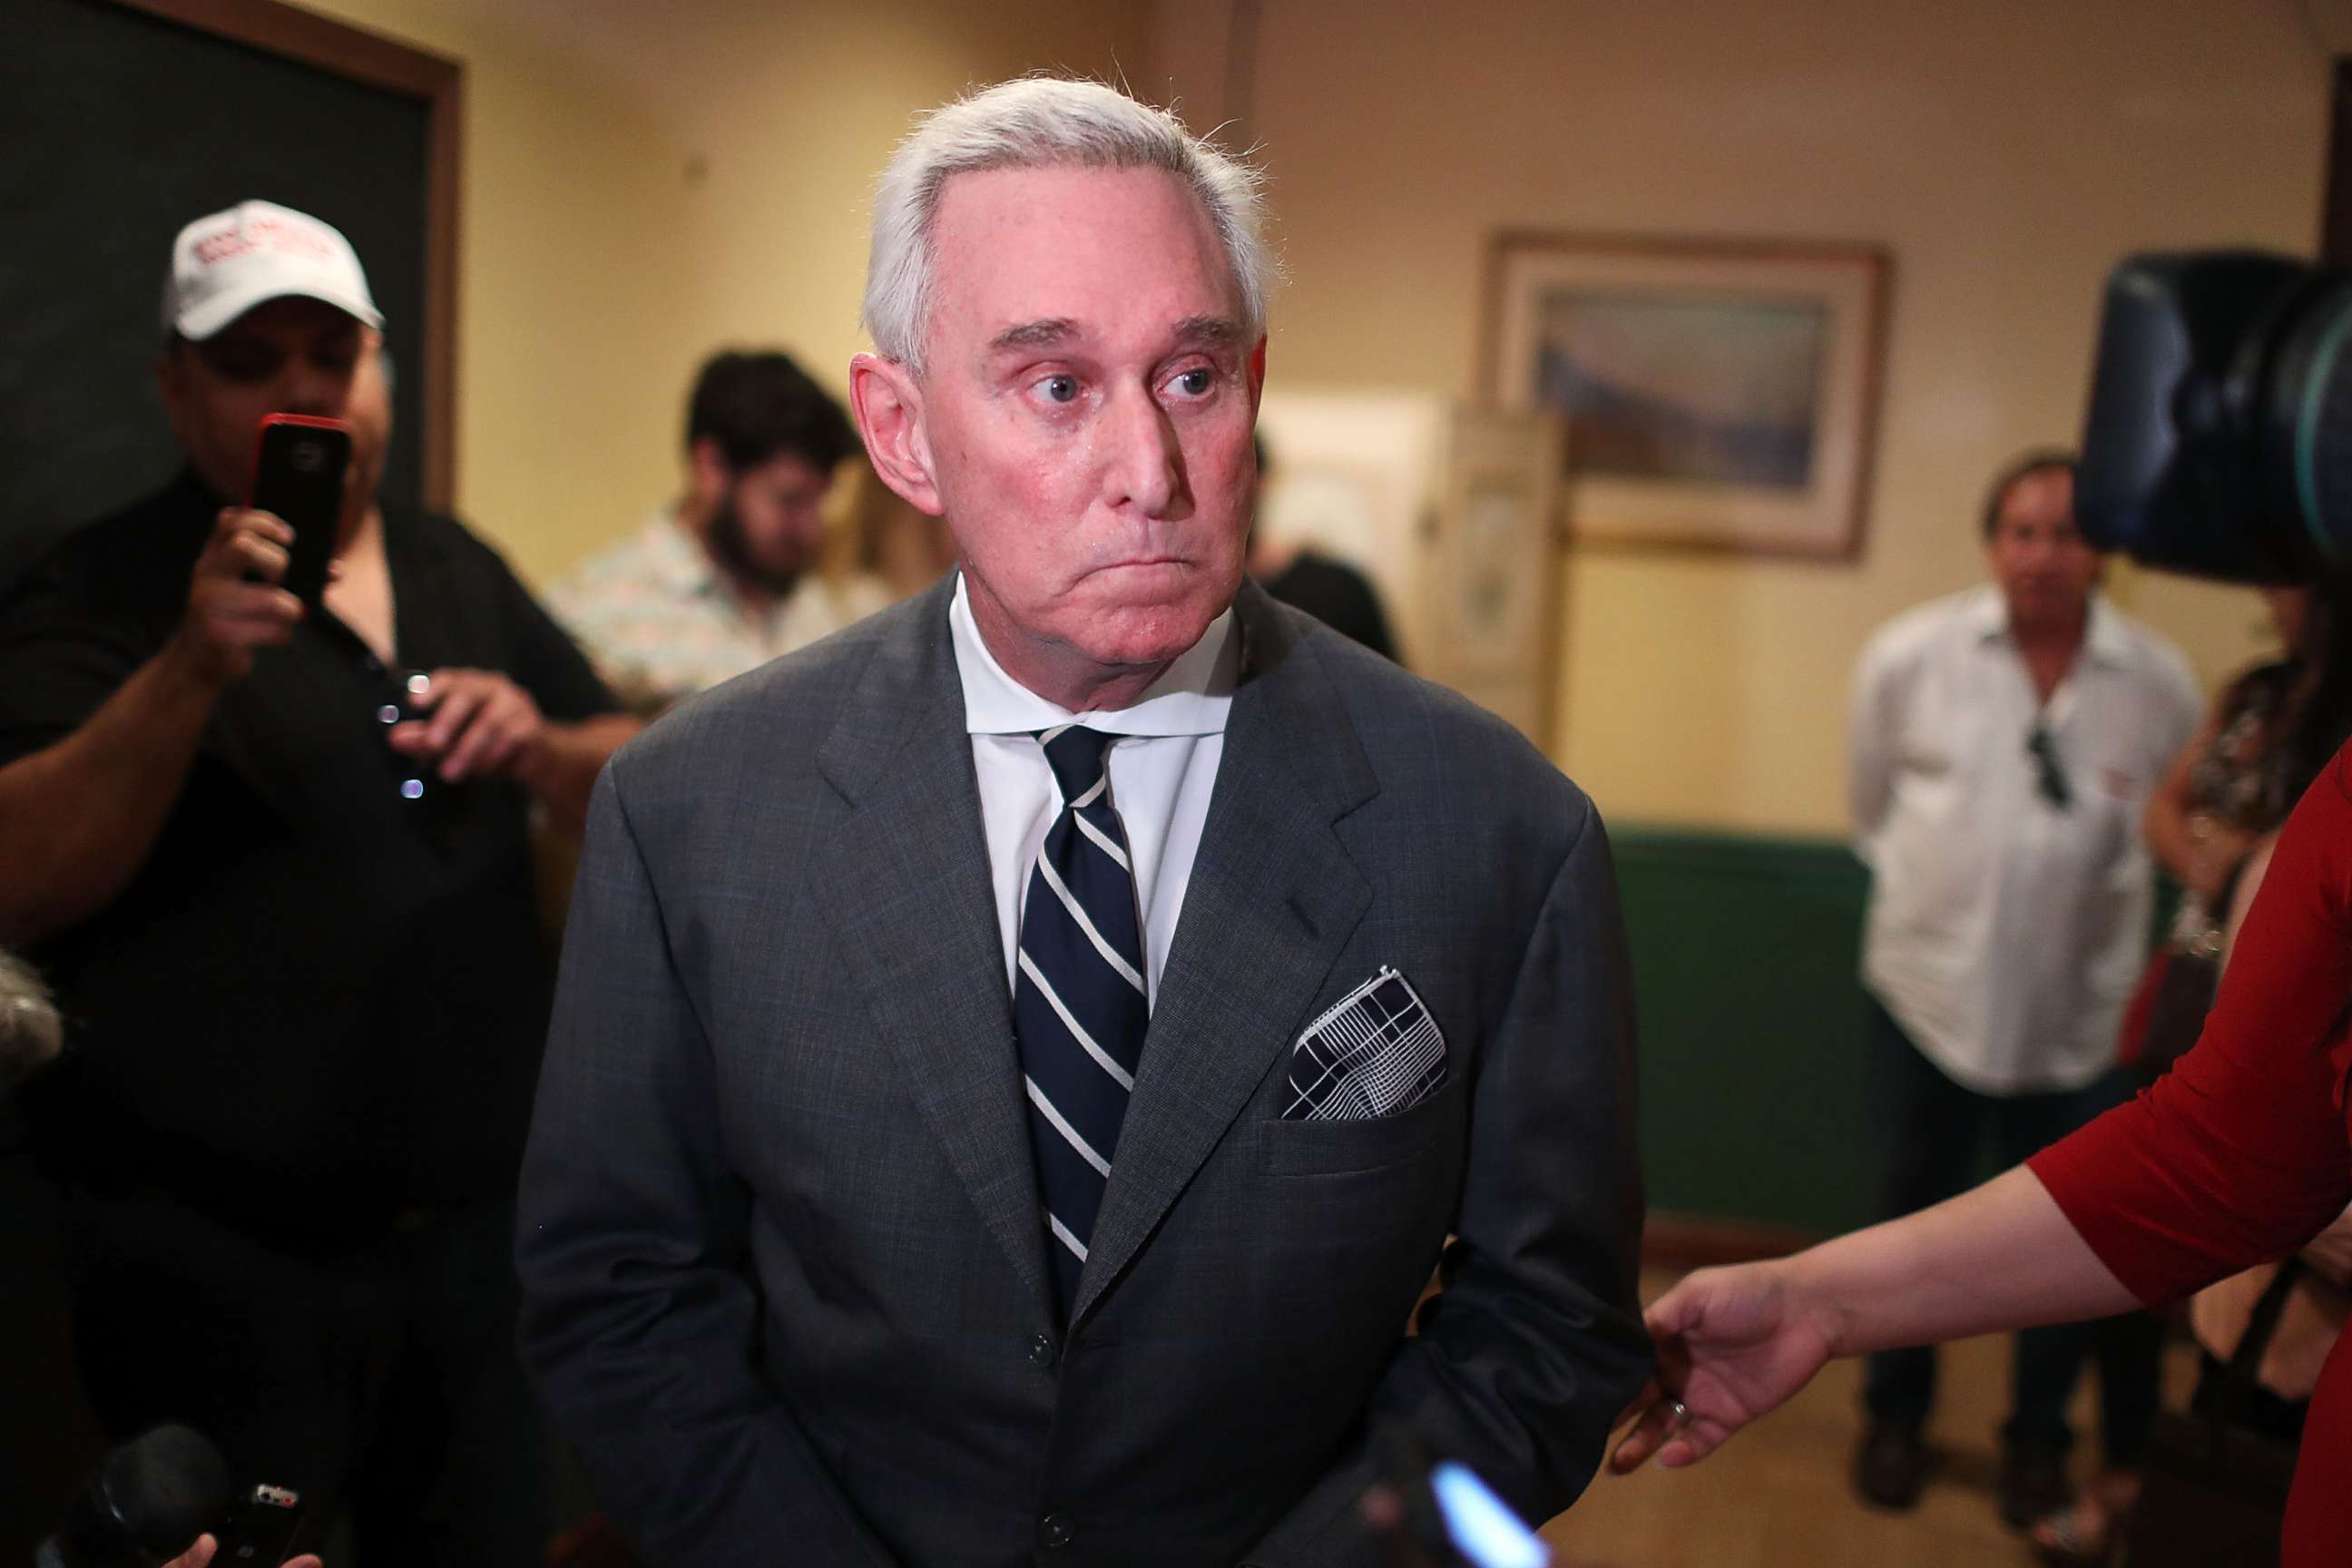 PHOTO: Roger Stone, a longtime political adviser and friend to President Donald Trump, speaks at the John Martin's Irish Pub and Restaurant on May 22, 2017 in Coral Gables, Fla.